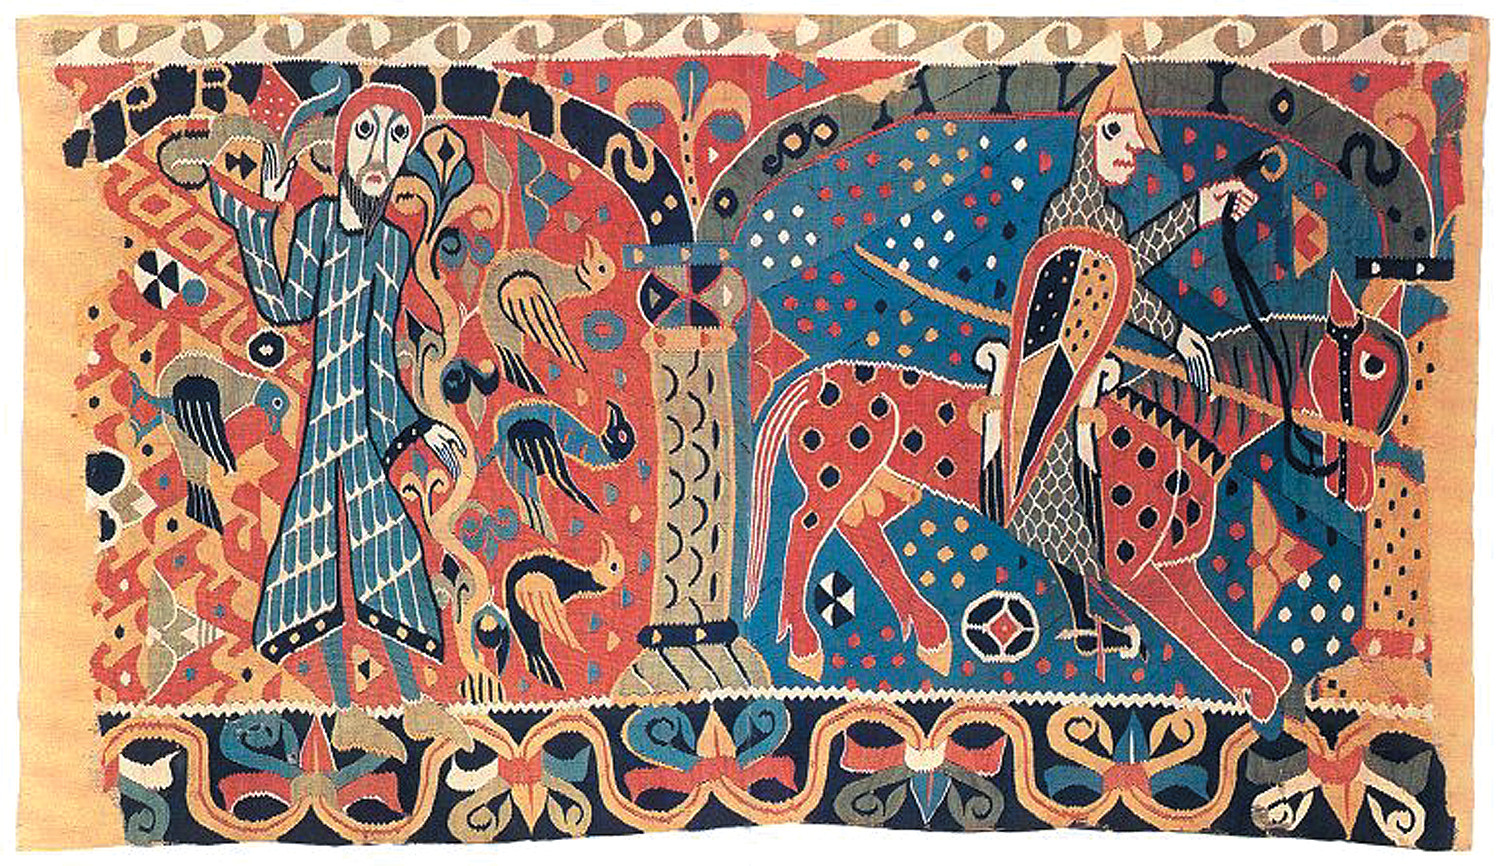 The armored warrior in this 12th century Baldishol tapestry provides an excellent stand-in for what Harald might have looked like in full armor.